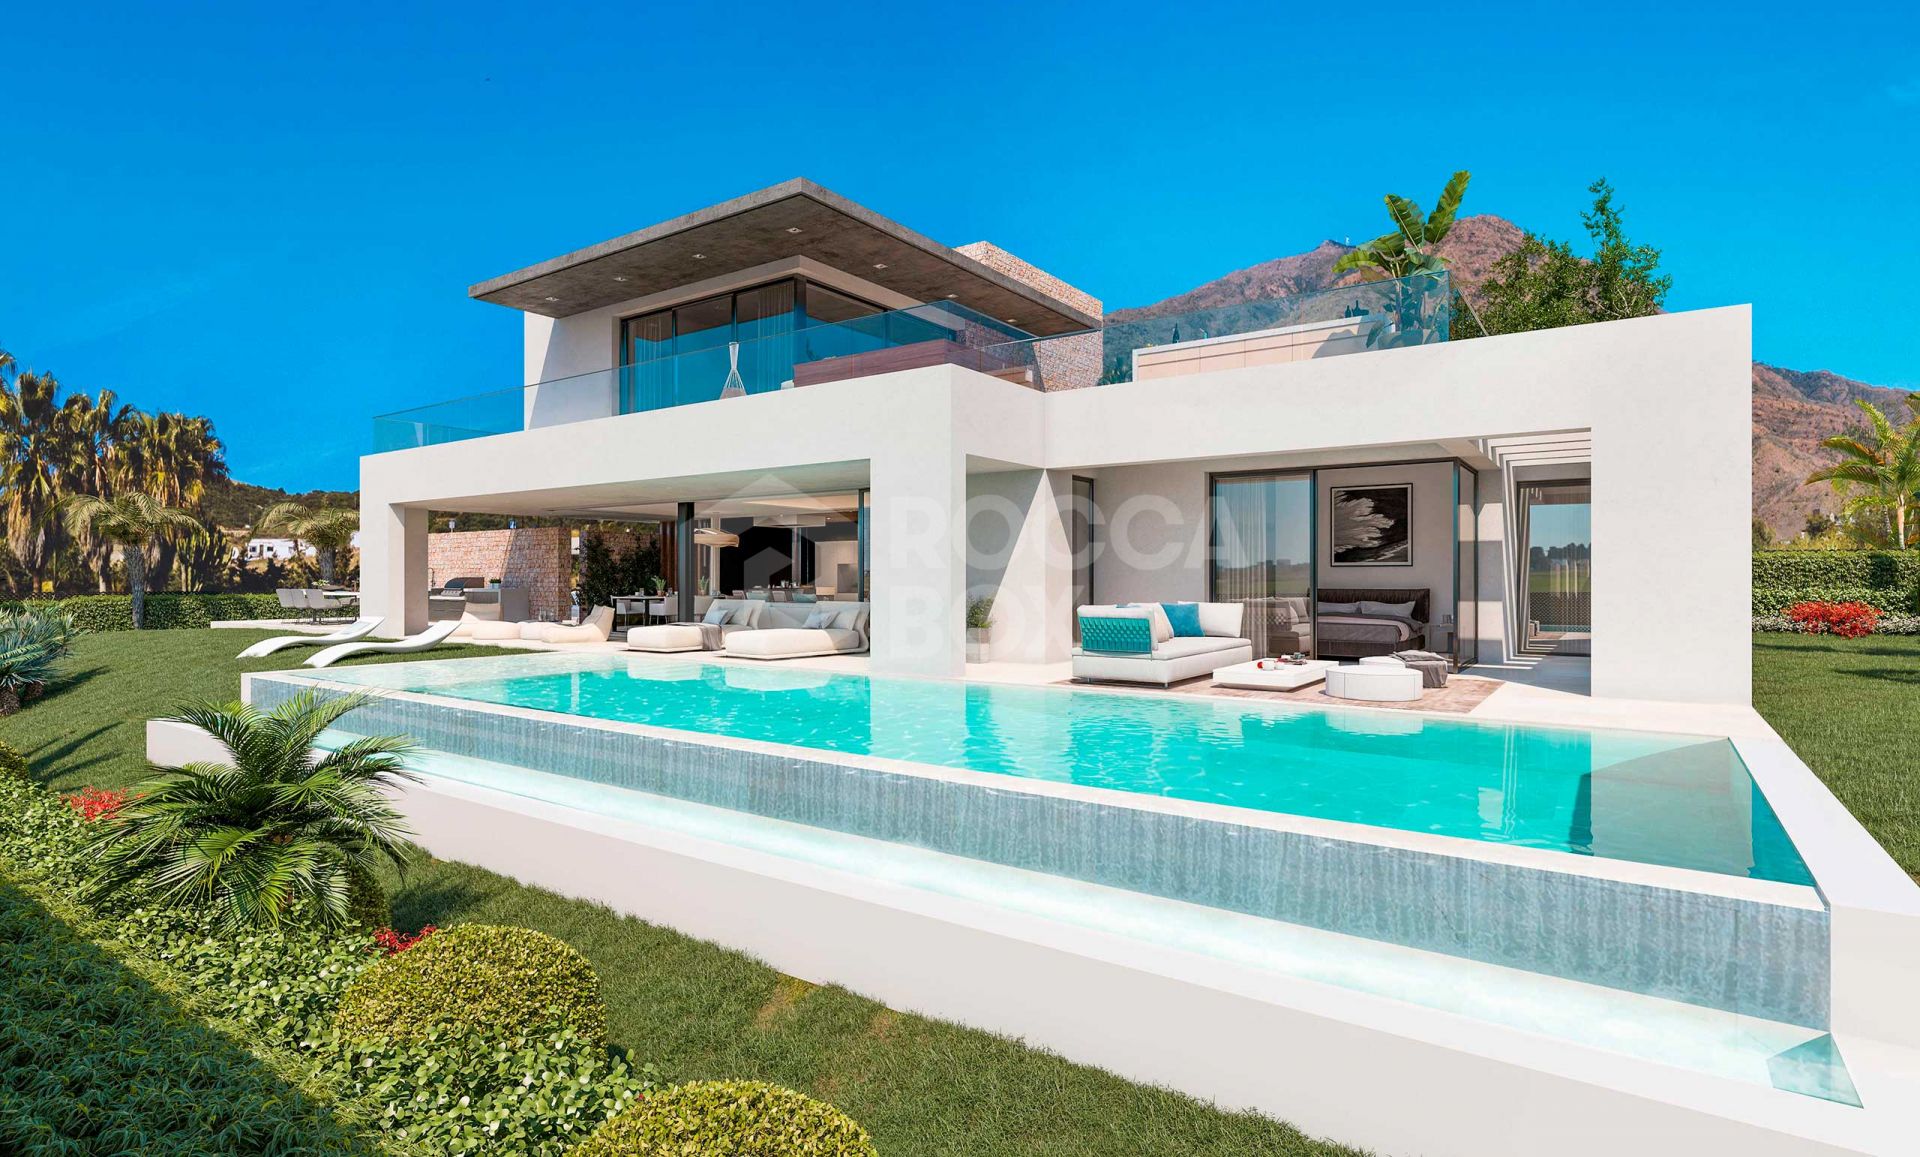 Experience the Beauty of this Exquisite Villa Development